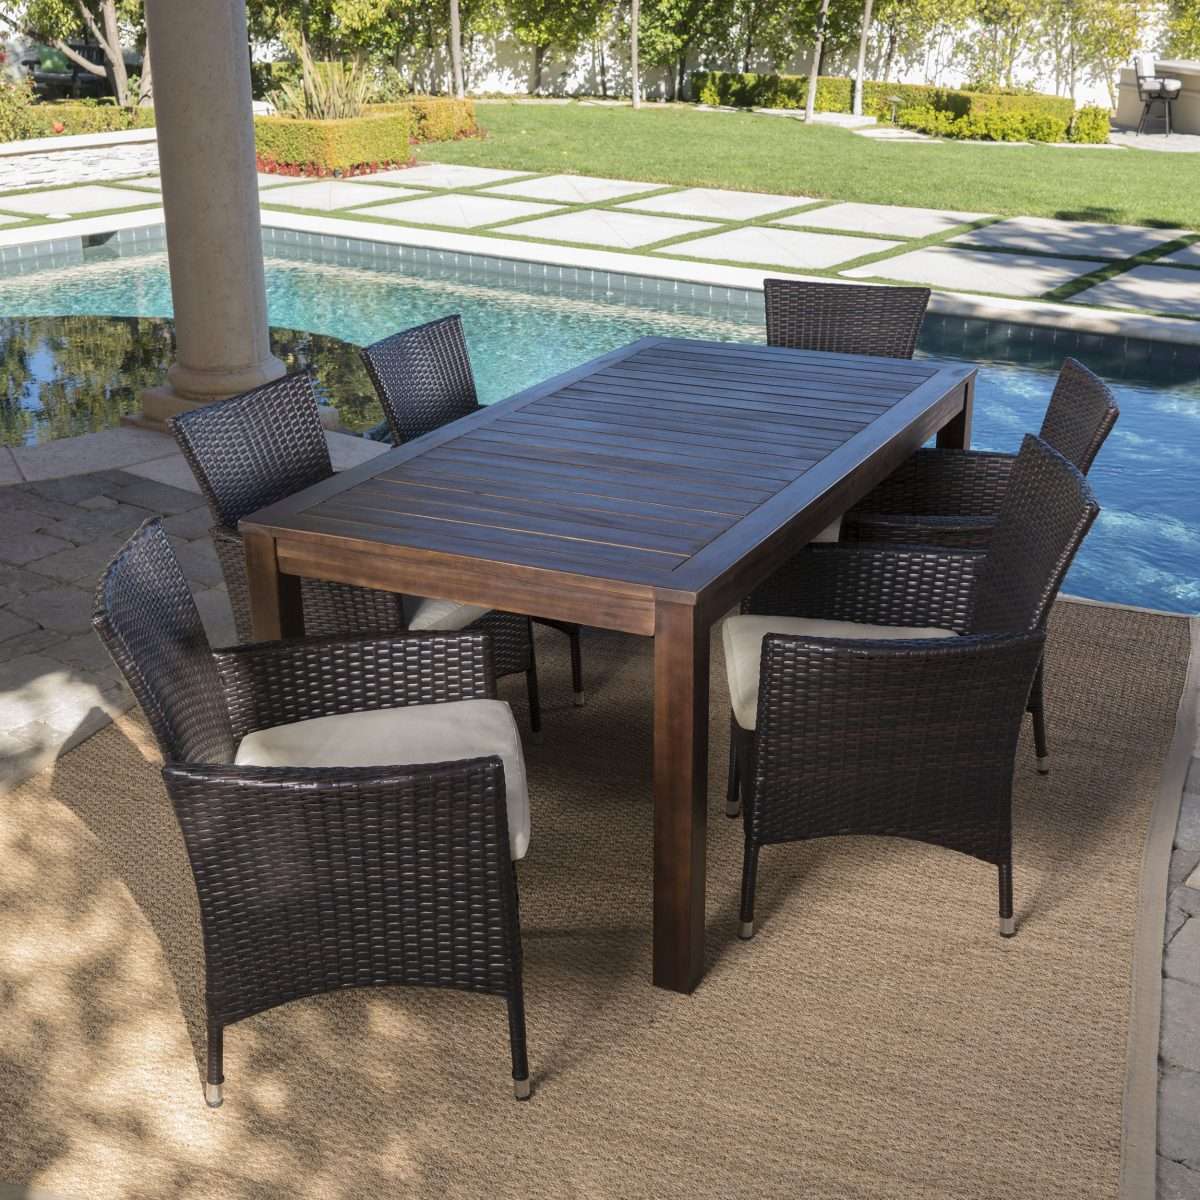 Taft Outdoor 7 Piece Dining Set with Wood Table and Wicker Chairs with ...